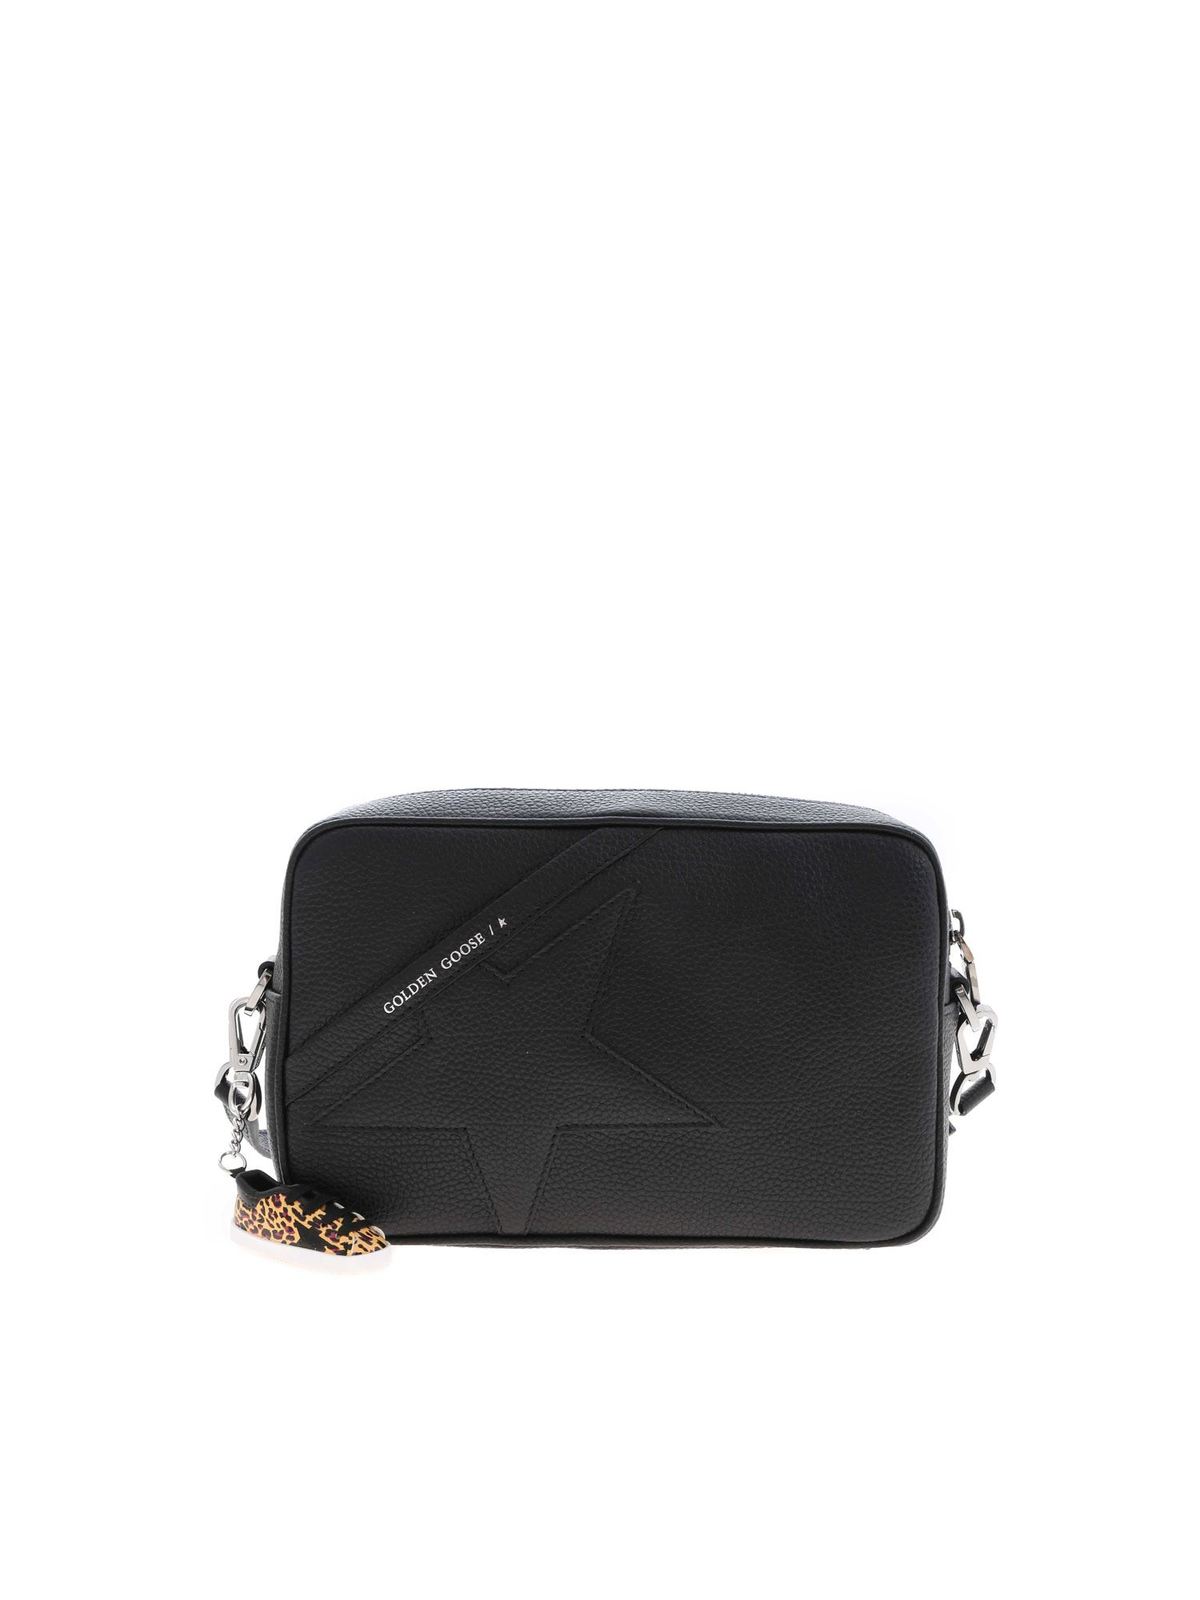 Off-white Star Bag in hammered leather, fuchsia Golden Goose star